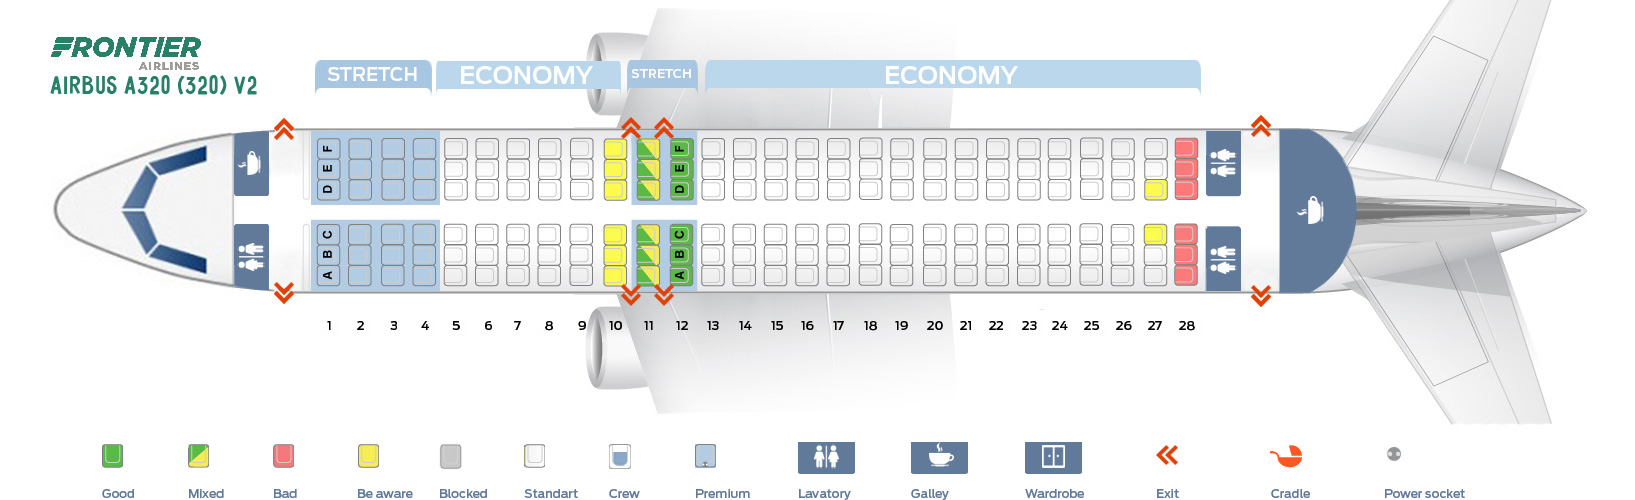 Frontier Airlines Airbus A320 200 Seat Map and Seating Chart Cabin V2 320